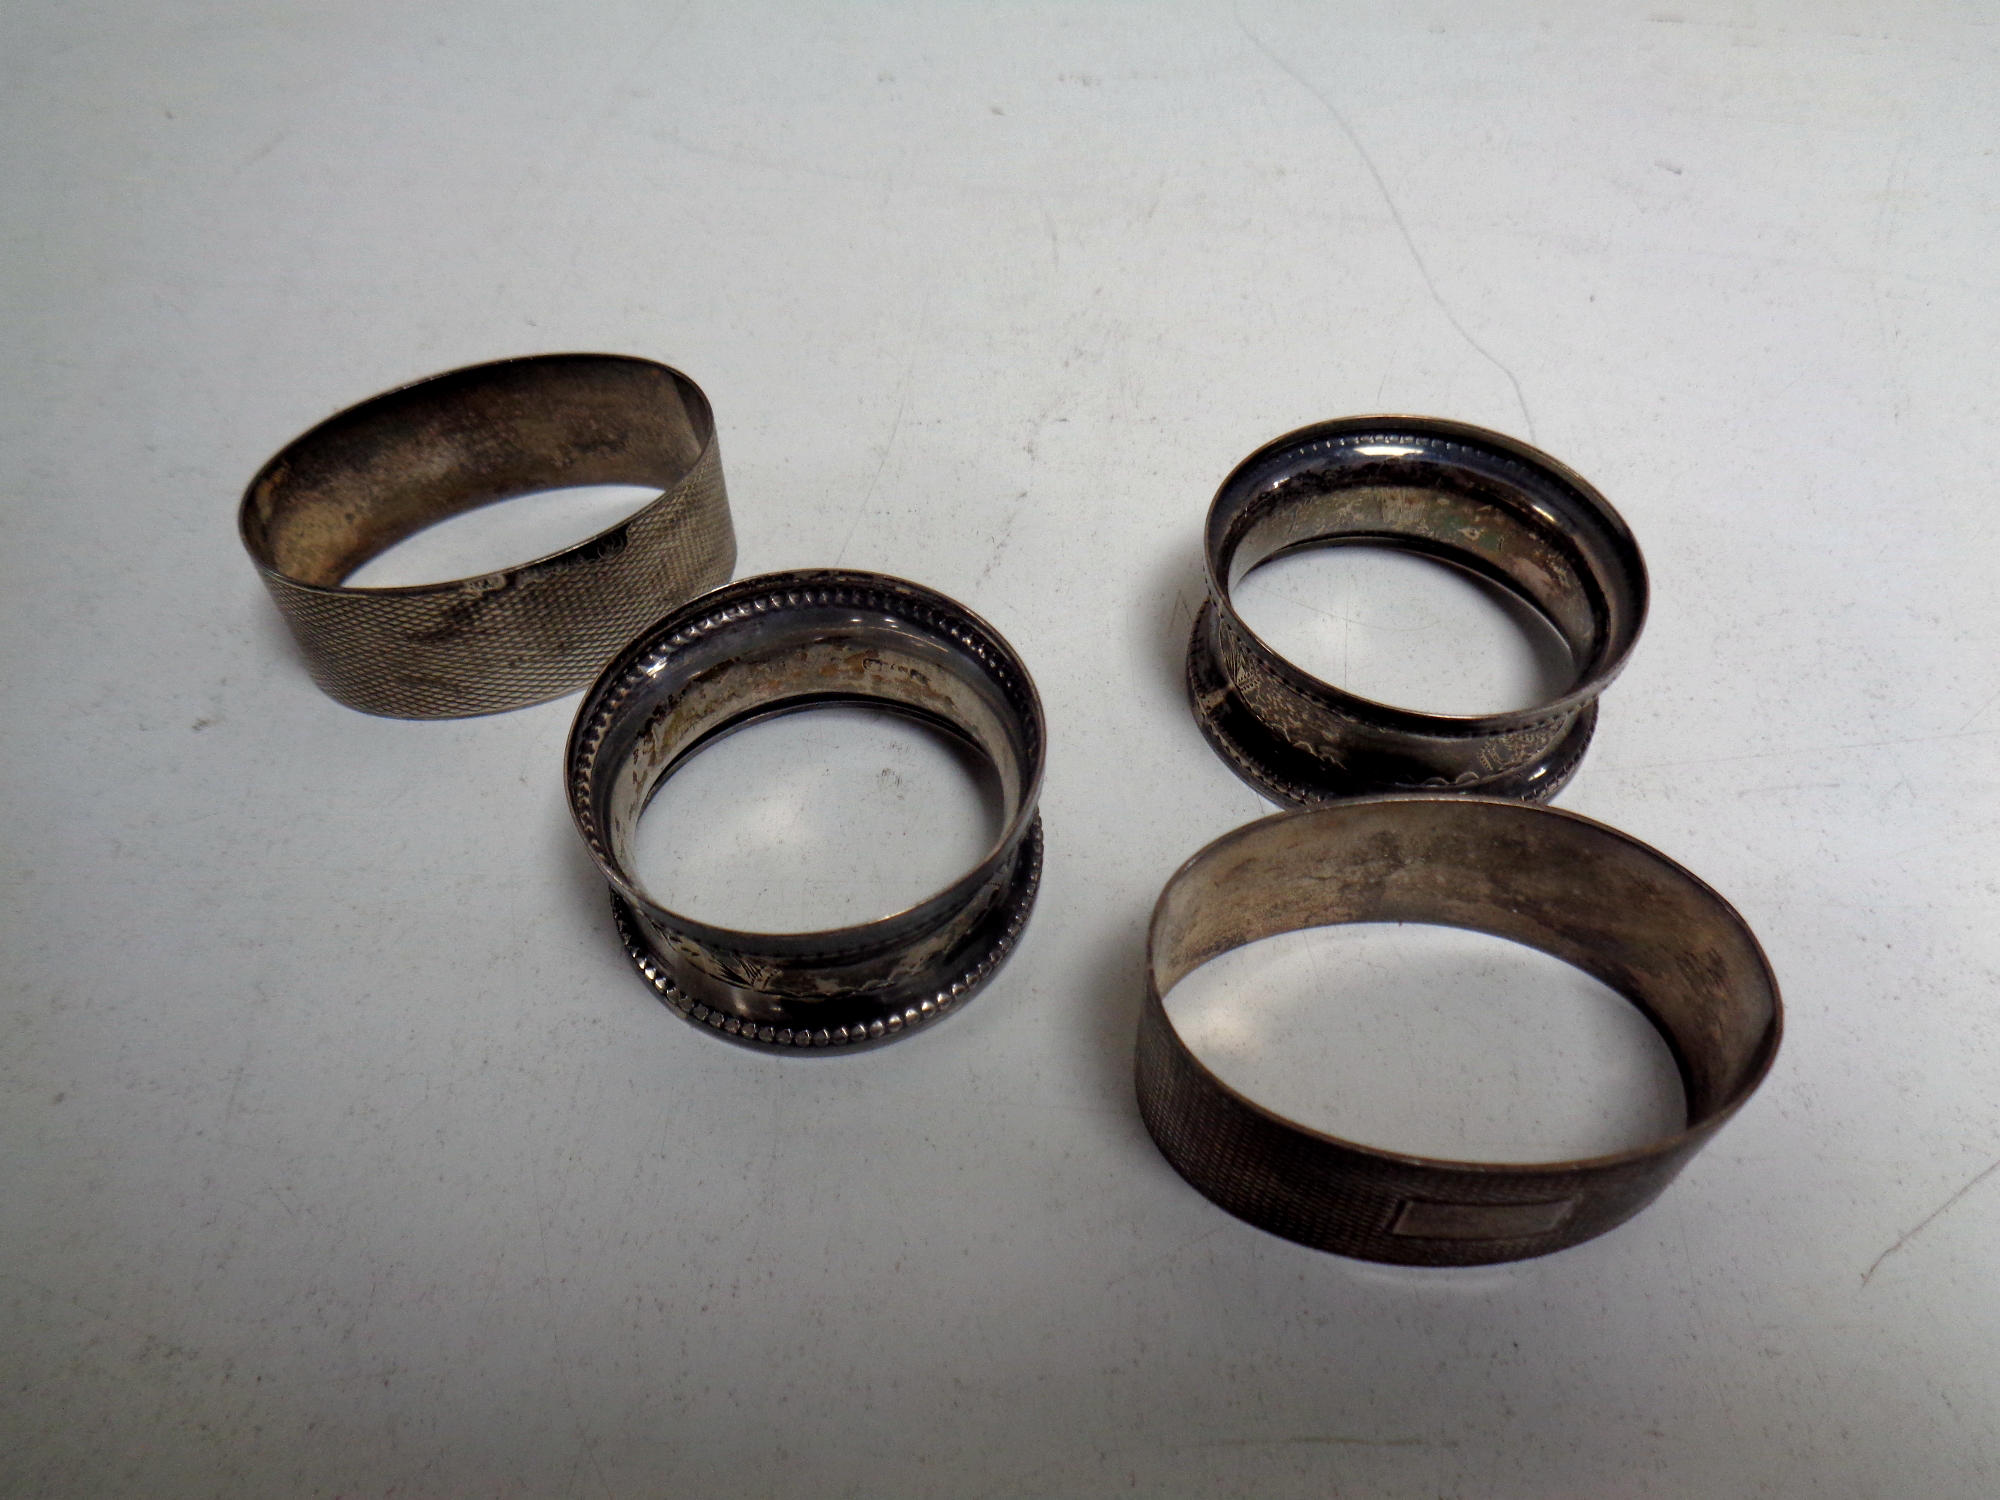 Two pairs of silver napkin rings